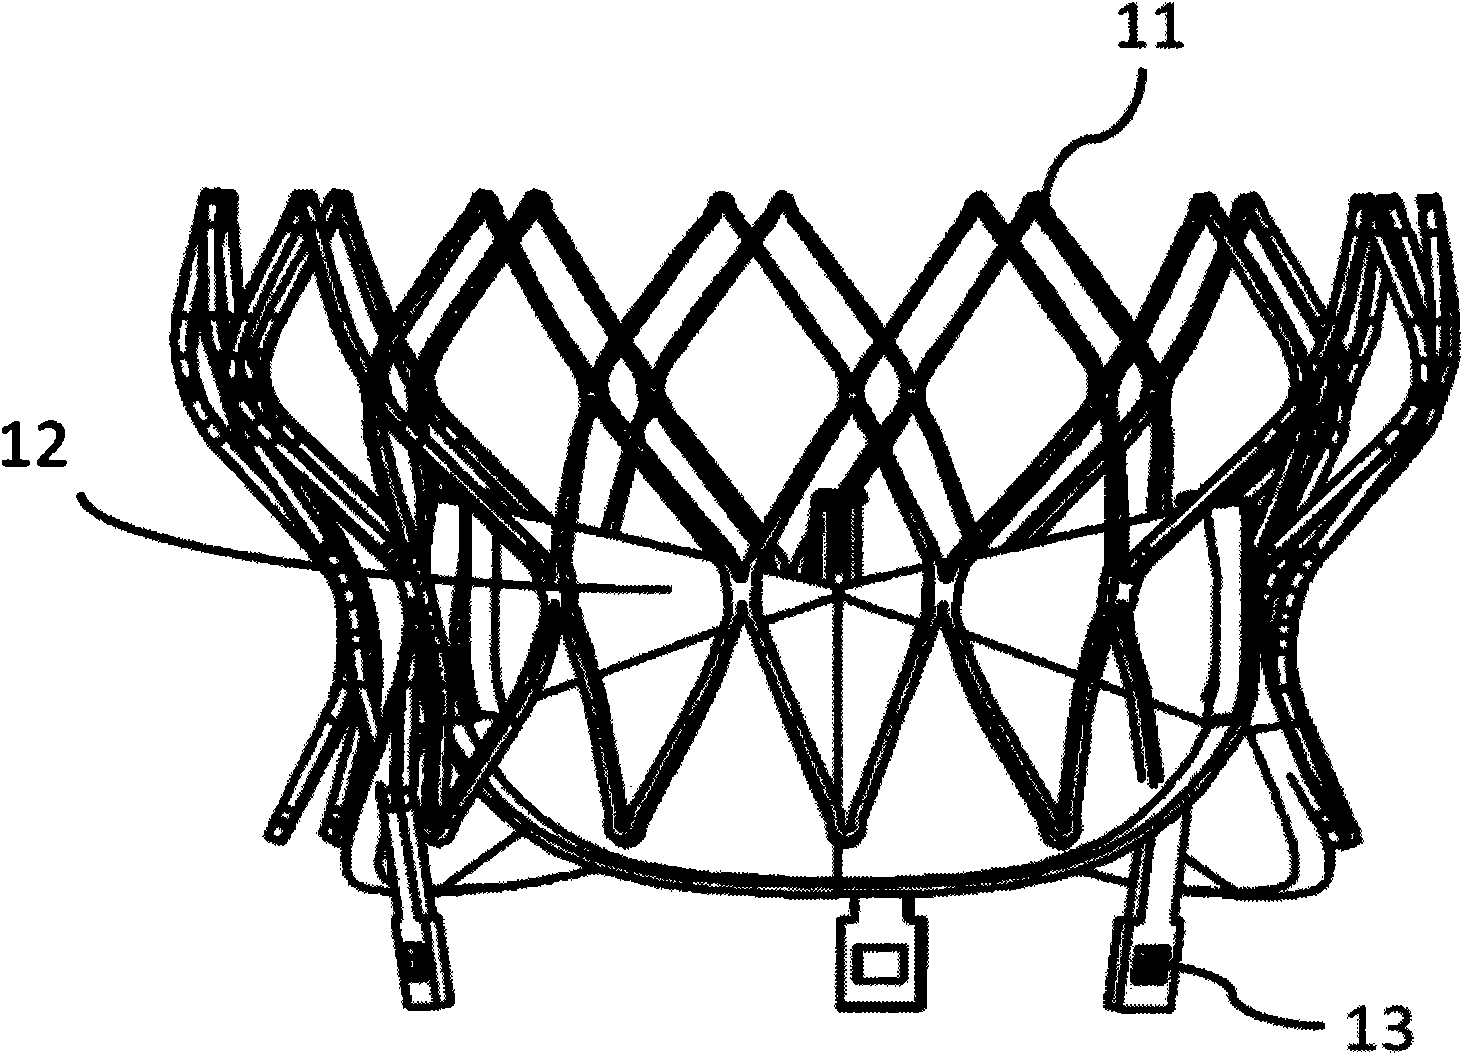 Heart valve implantation device provided with anchoring device